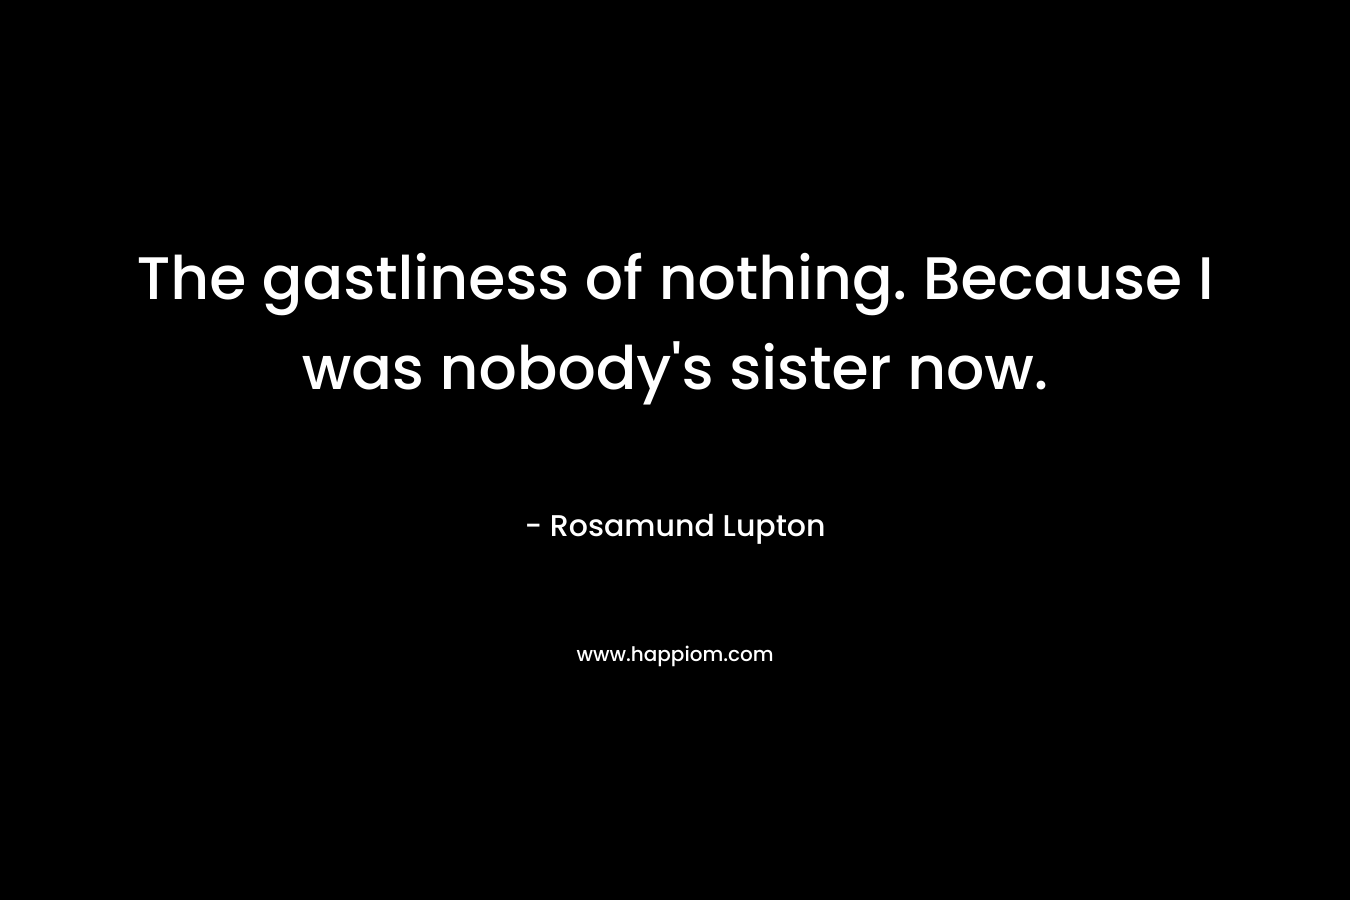 The gastliness of nothing. Because I was nobody's sister now.